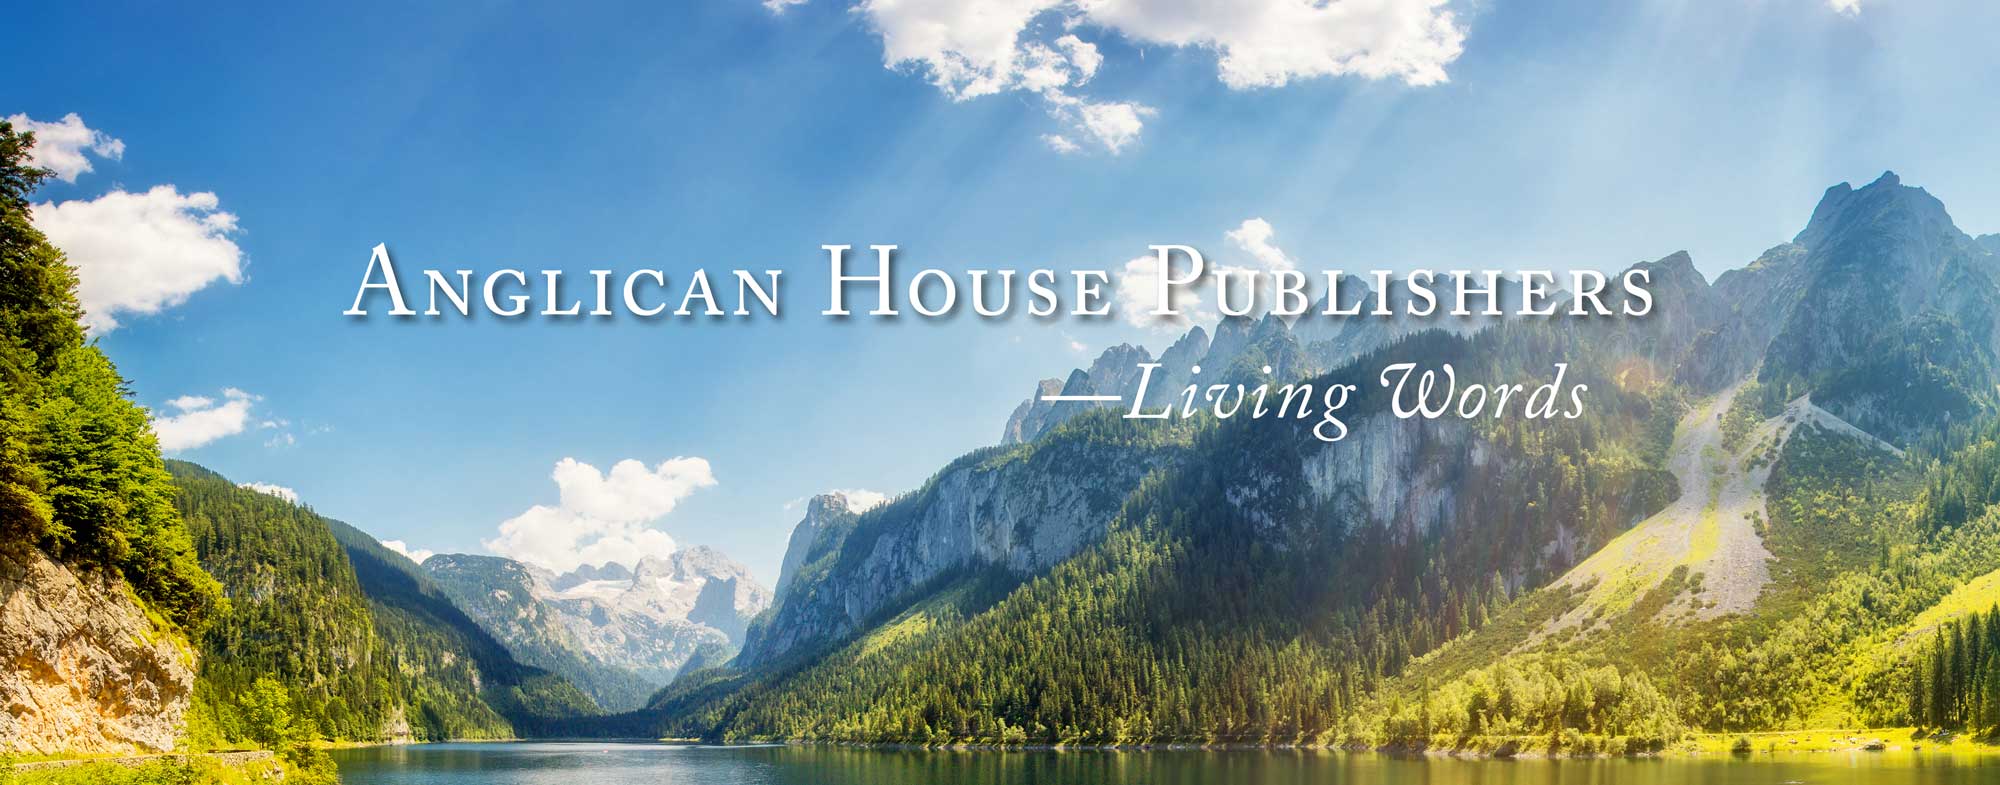 Anglican House Publishers- Living Words text overlaid beautiful mountain scene 